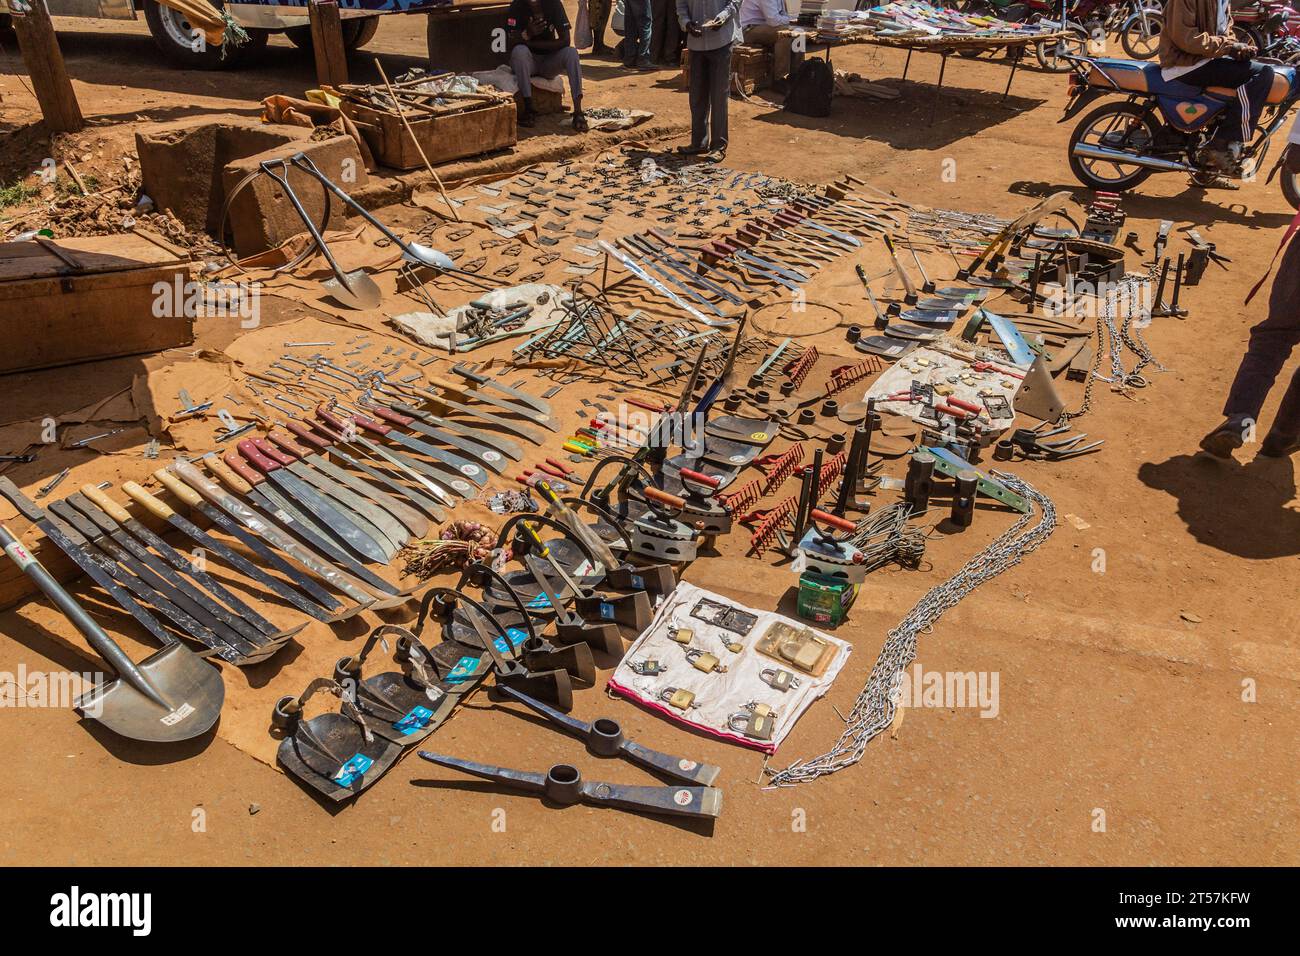 BUSIA, KENYA - FEBRUARY 24, 2020: Agricultural tools on a market in Busia, Kenya Stock Photo